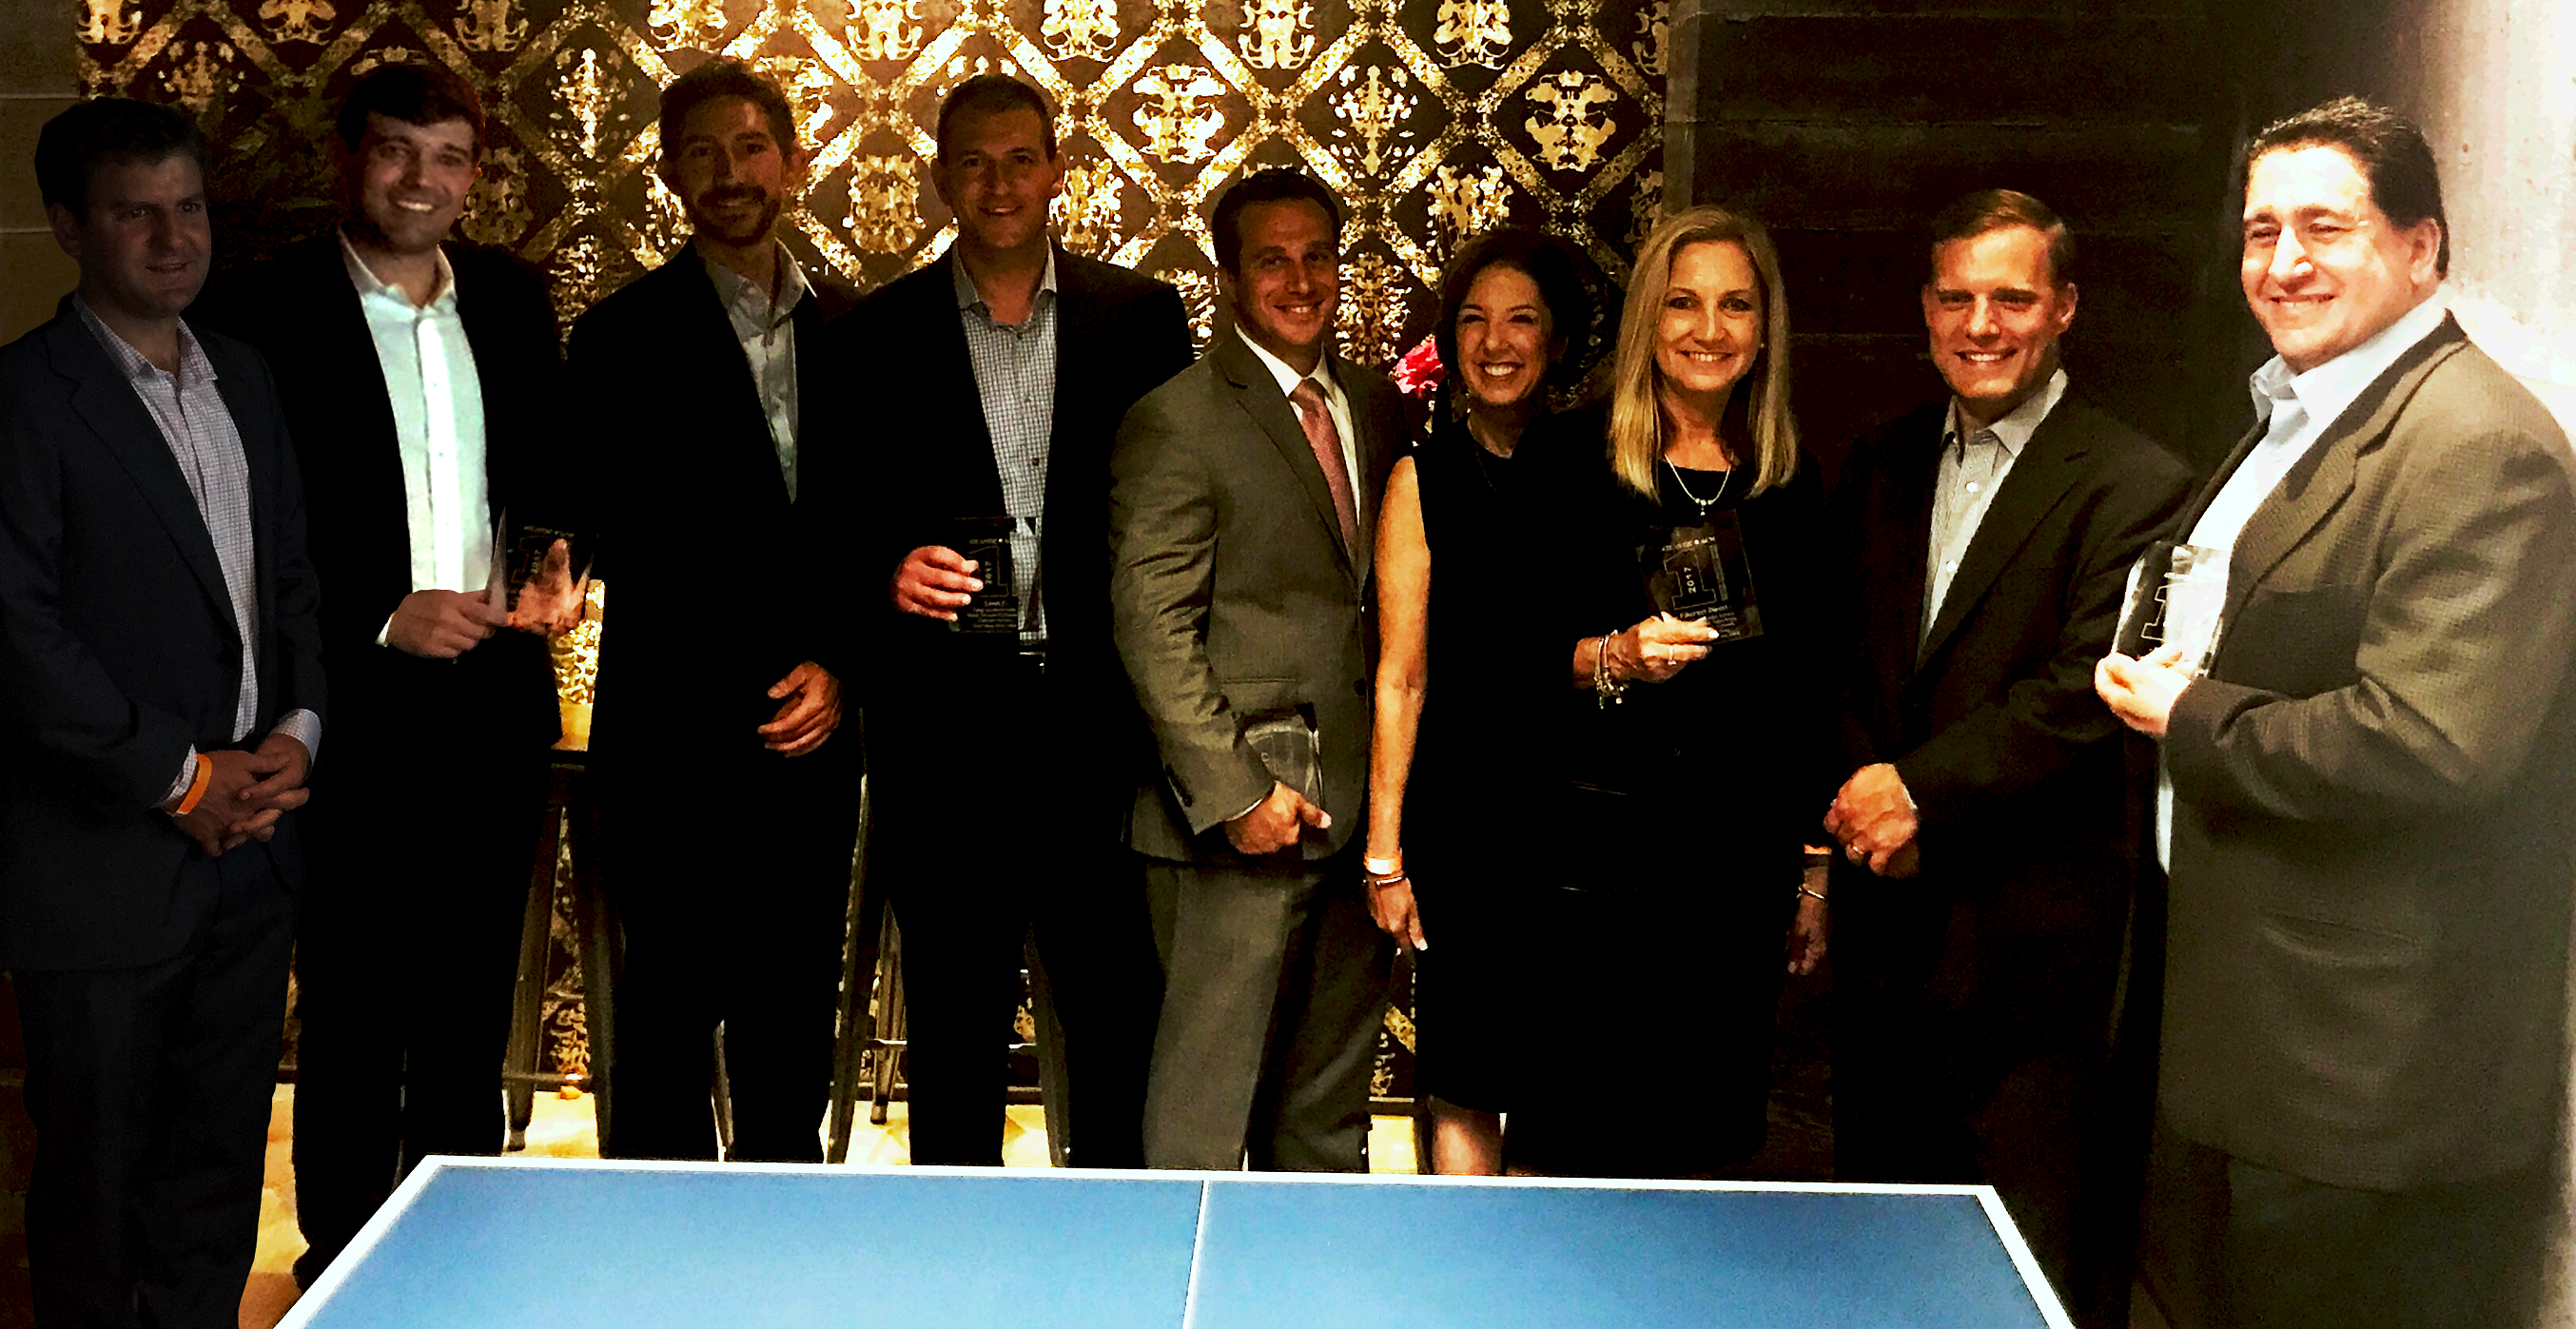 From left to right: Charlie Reed, Partner, ATLANTIC-ACM; Jay Clark, VP Carrier Sales, Cox; Kristian Andersen, Senior Director, Level 3; Warren Greenberg, General Manager NYC, Level 3; Joseph Flynn, VP Sales Strategy and Support, Altice Business; Lonnie Maier, VP Enterprise Sales and Marketing, Fibernet Direct; April Reynolds, VP Customer Operations, Fibernet Direct; Fedor Smith, President and Managing Partner, ATLANTIC-ACM; Jim Mascola, Sales Engineering Manager Northeast, Sprint